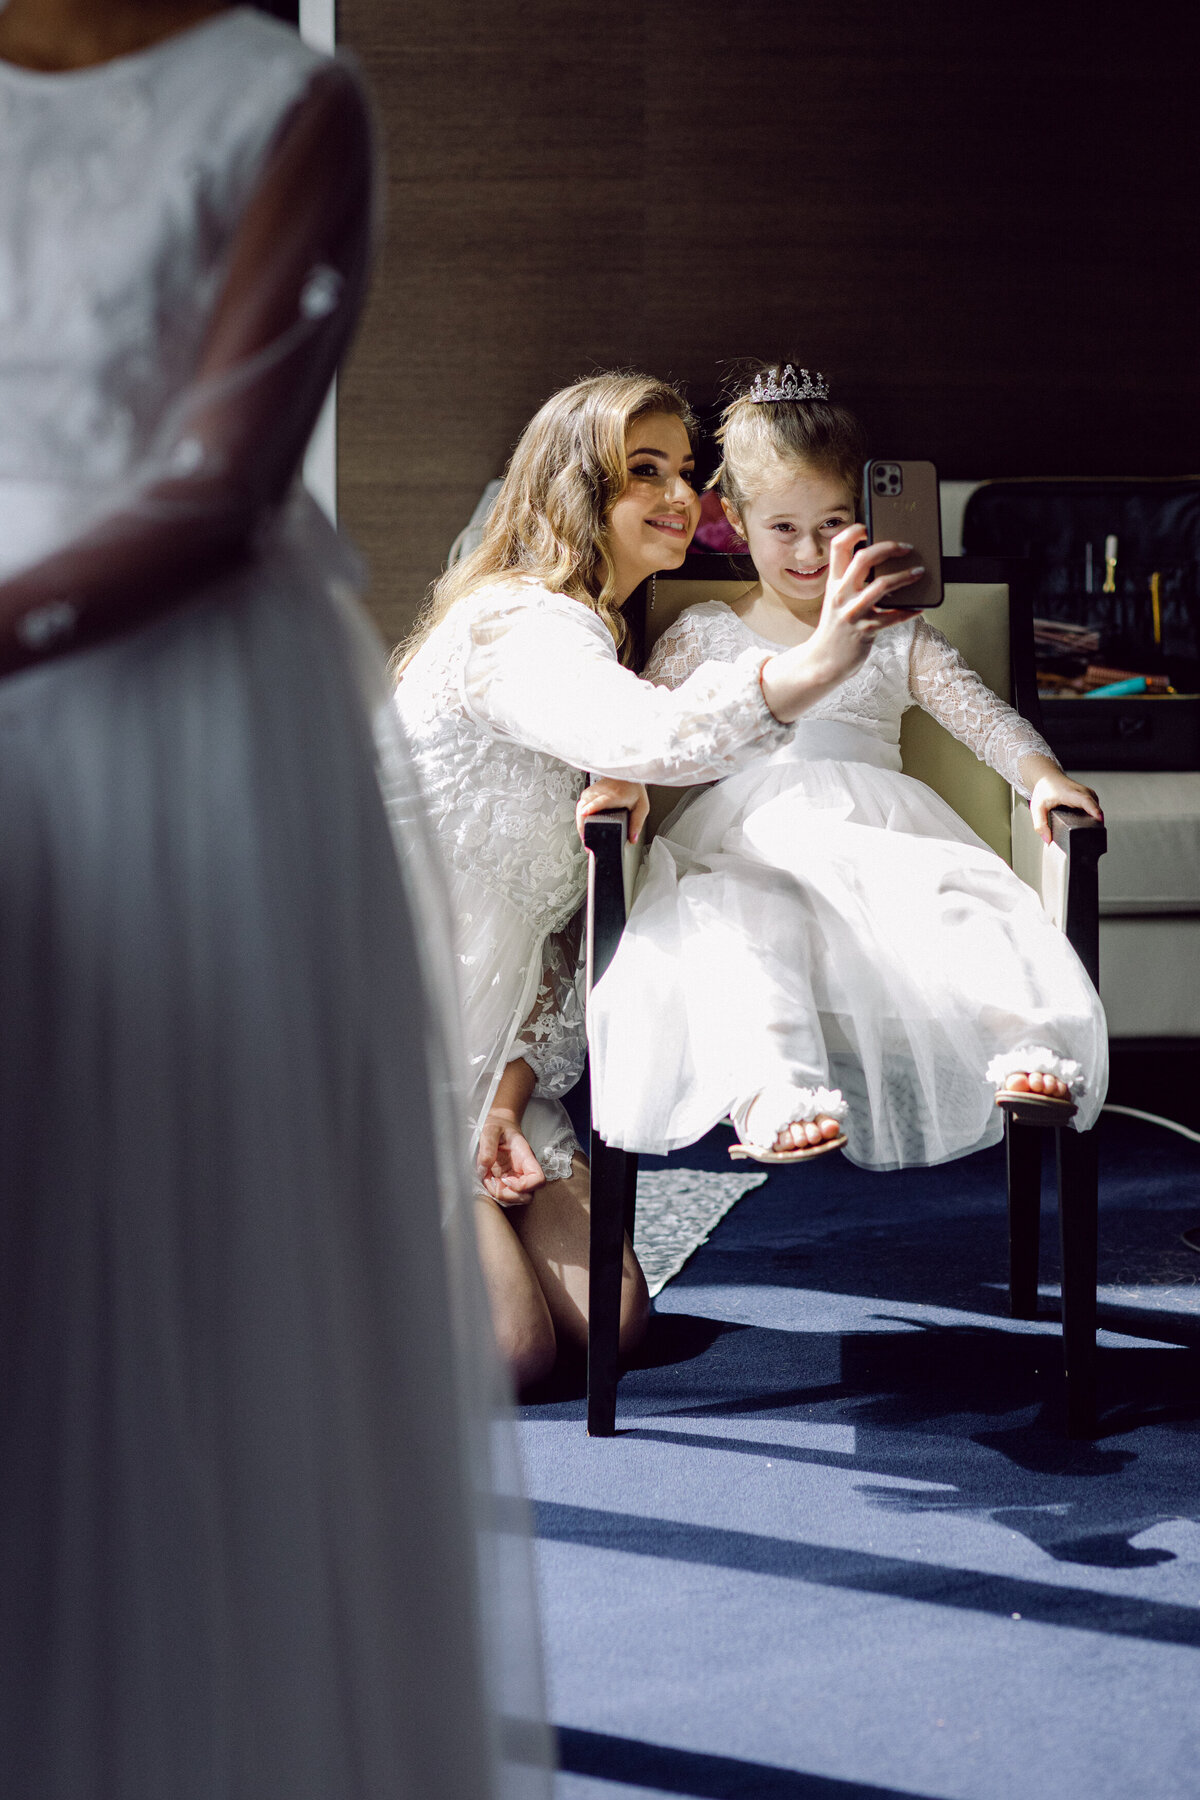 Bride in Lace Robe + Flower Girl with lace dress and tiara